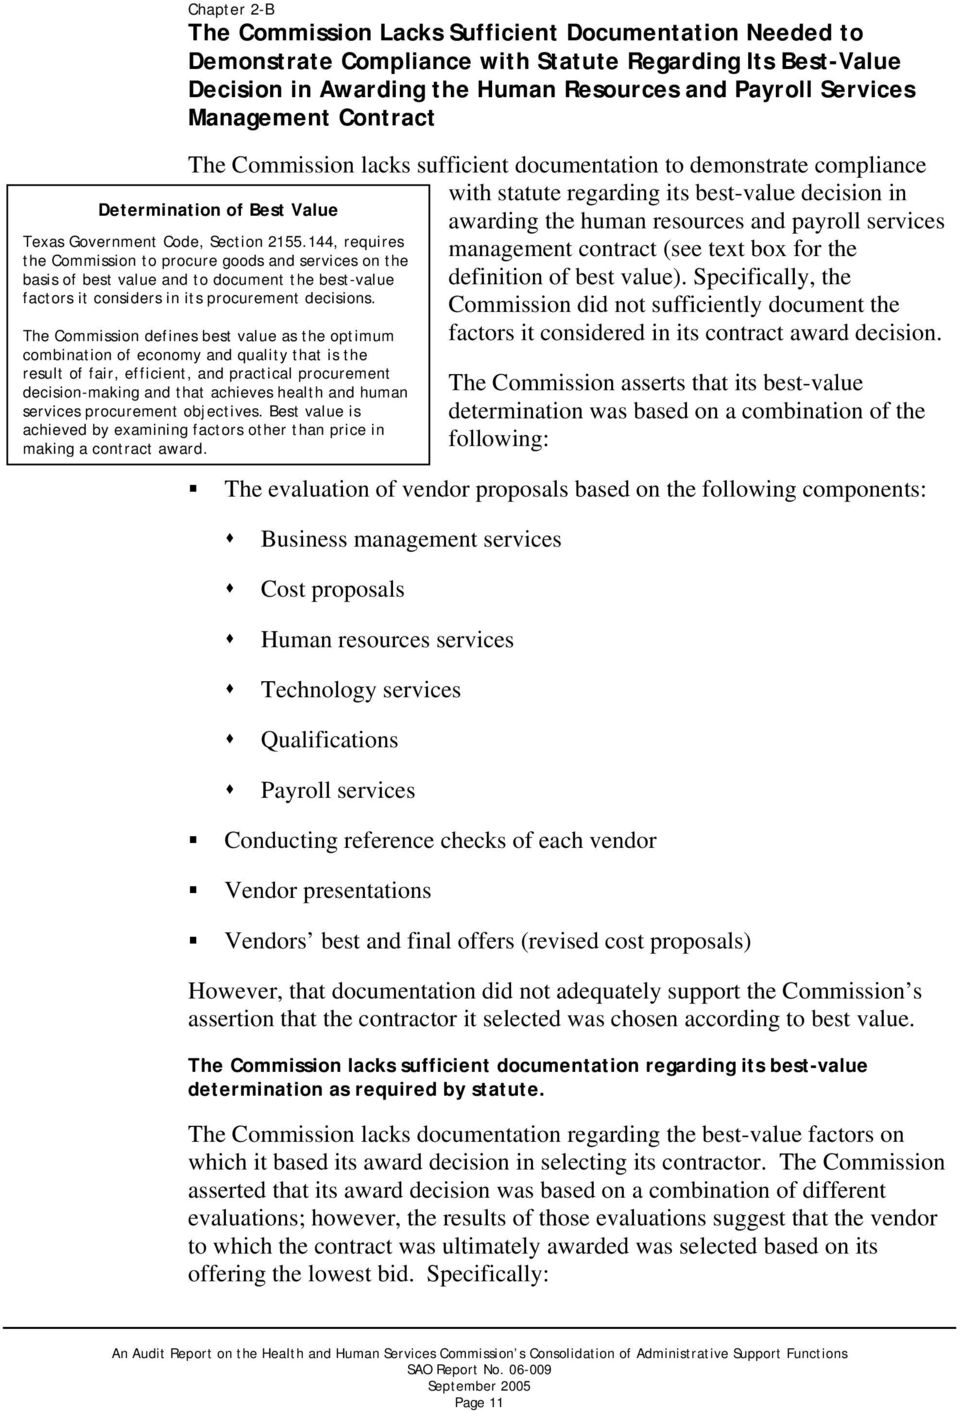 management contract (see text box for the definition of best value). Specifically, the Commission did not sufficiently document the factors it considered in its contract award decision.